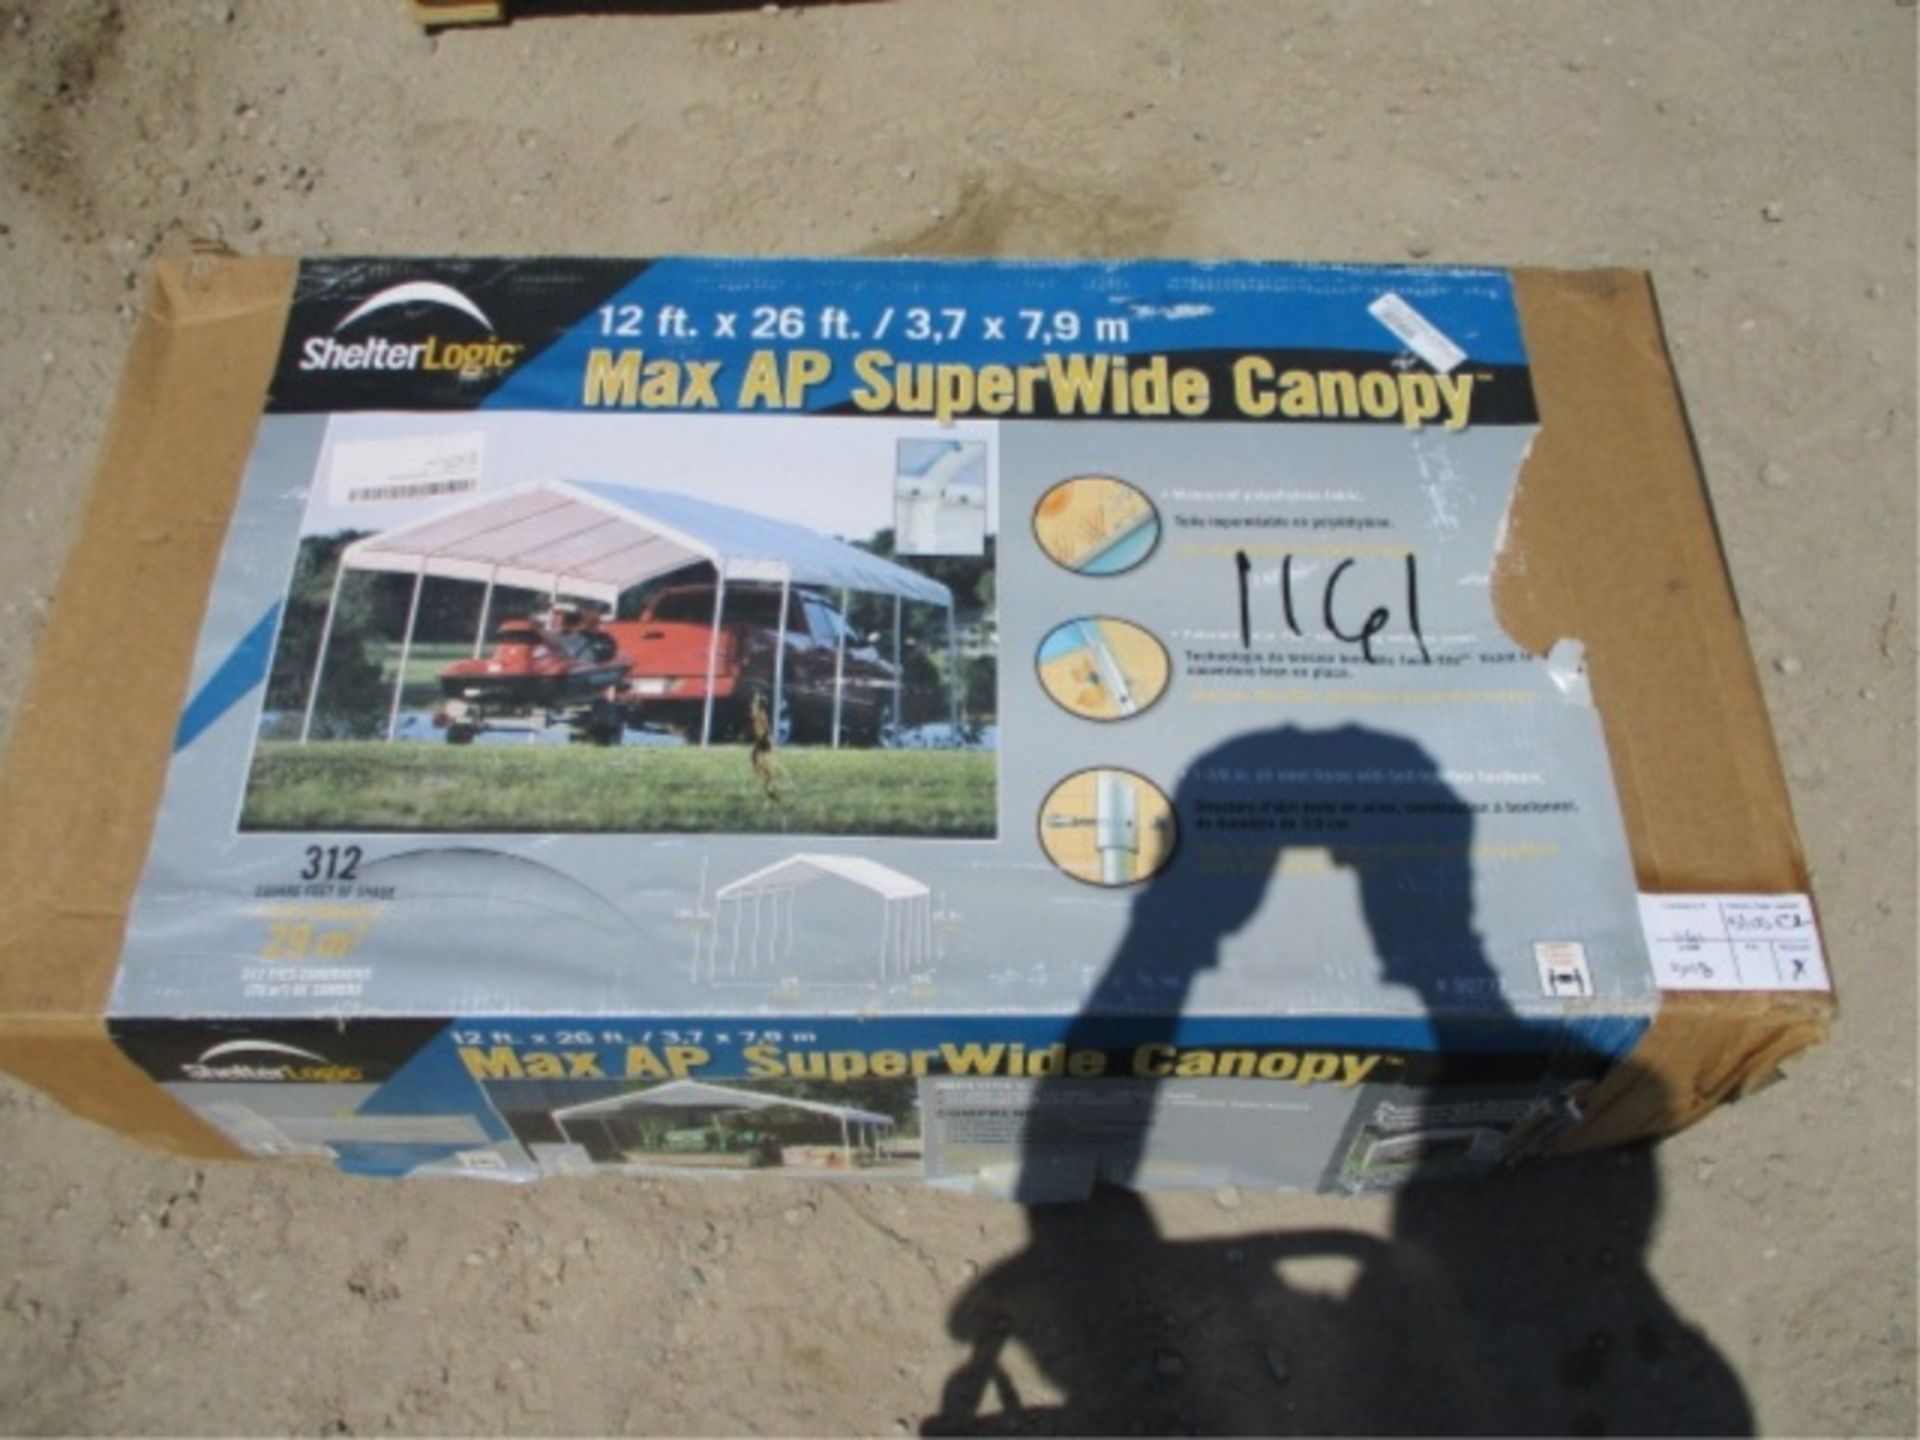 17' x 26' Shelter Logic Max AP Superwide Canopy - Image 7 of 9